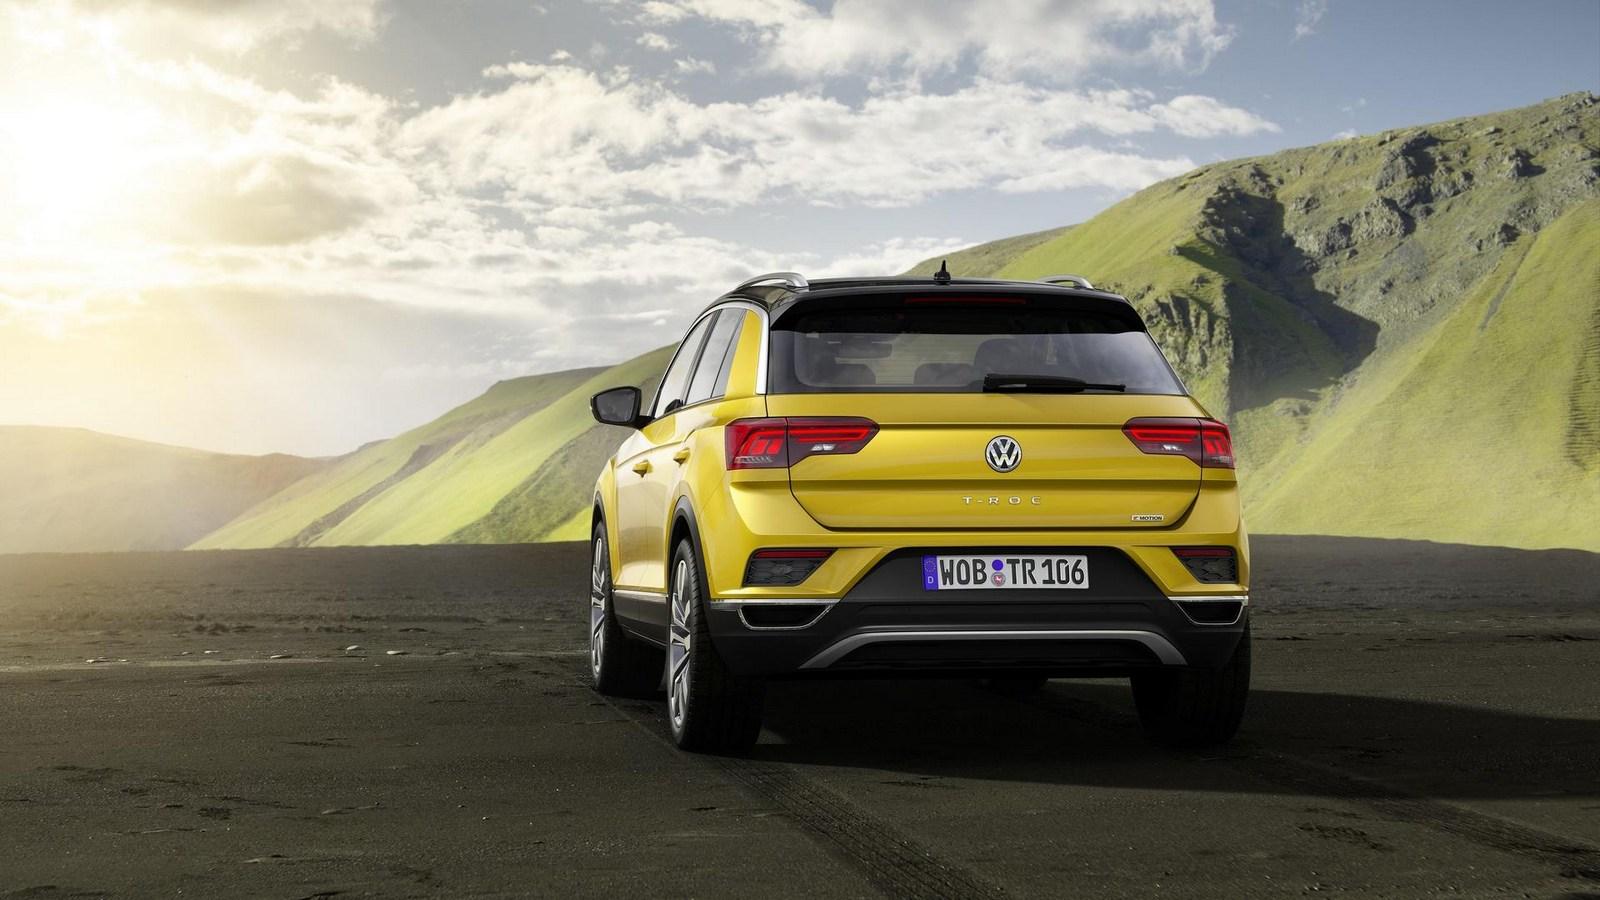 Volkswagen T Cross To Be Manufactured In Brazil